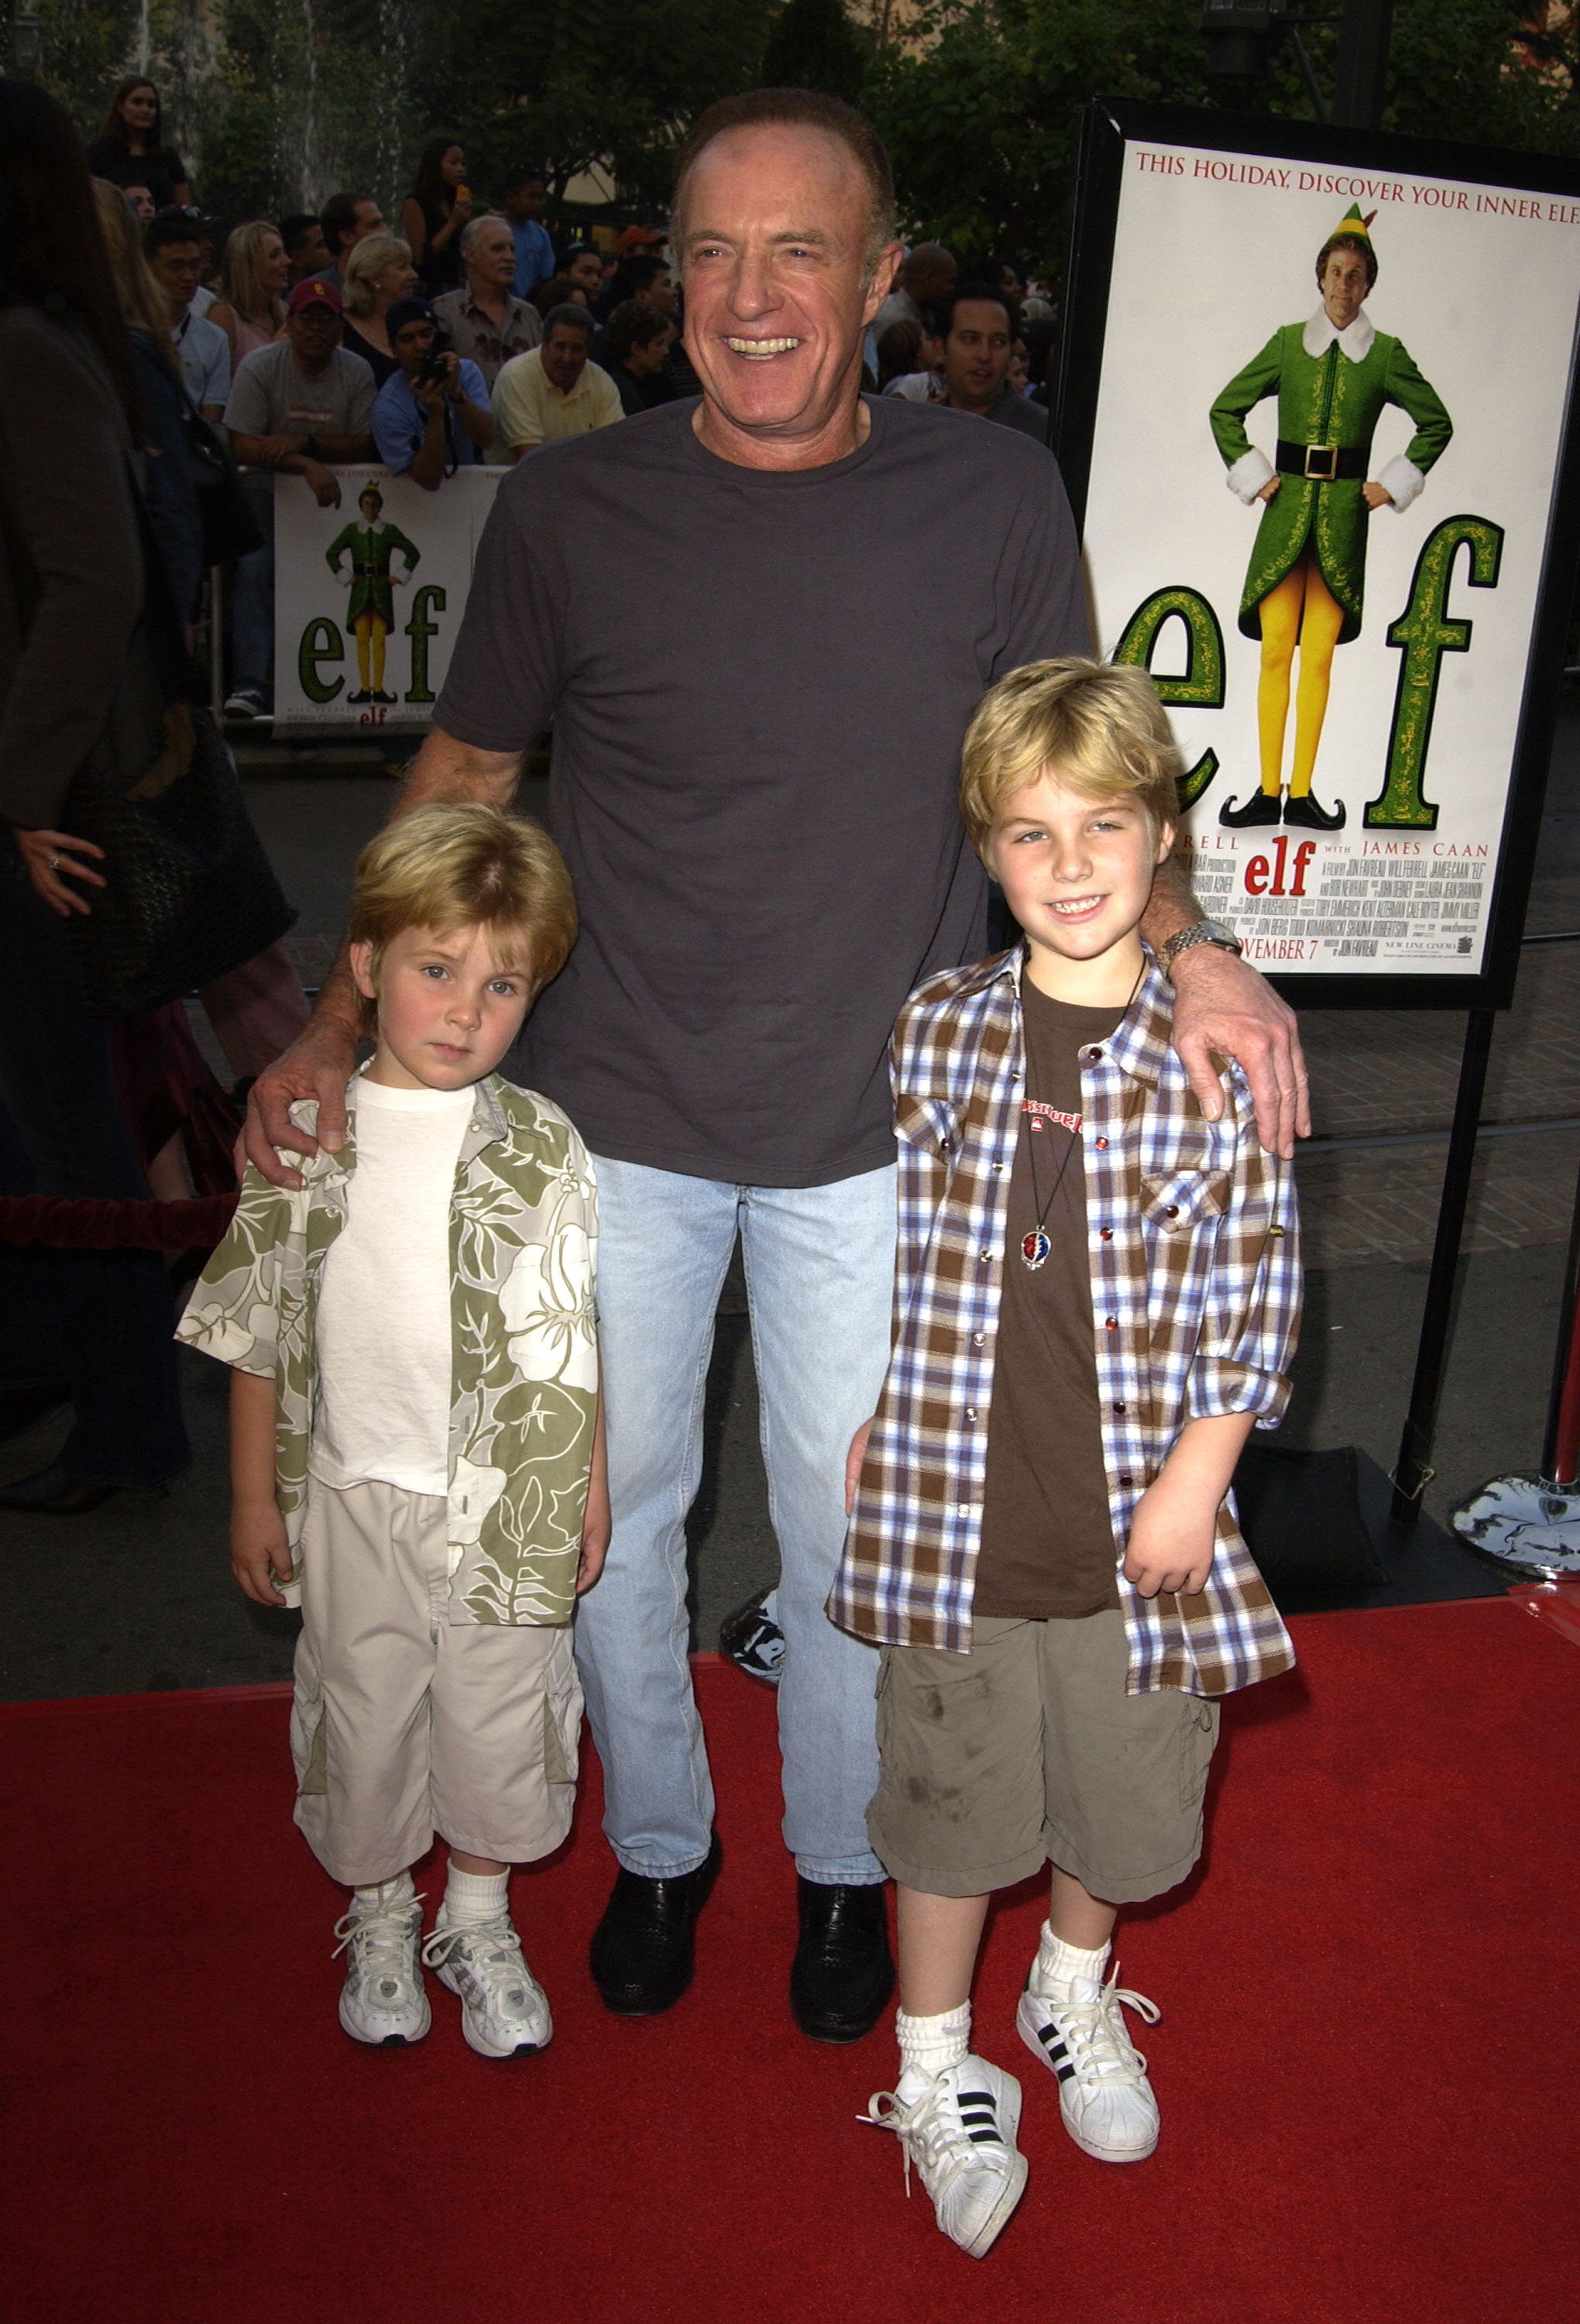 James Caan and sons Jimmy and Jake at the "Elf" special screening in Los Angeles, California, on October 26, 2003. | Source: Getty Images